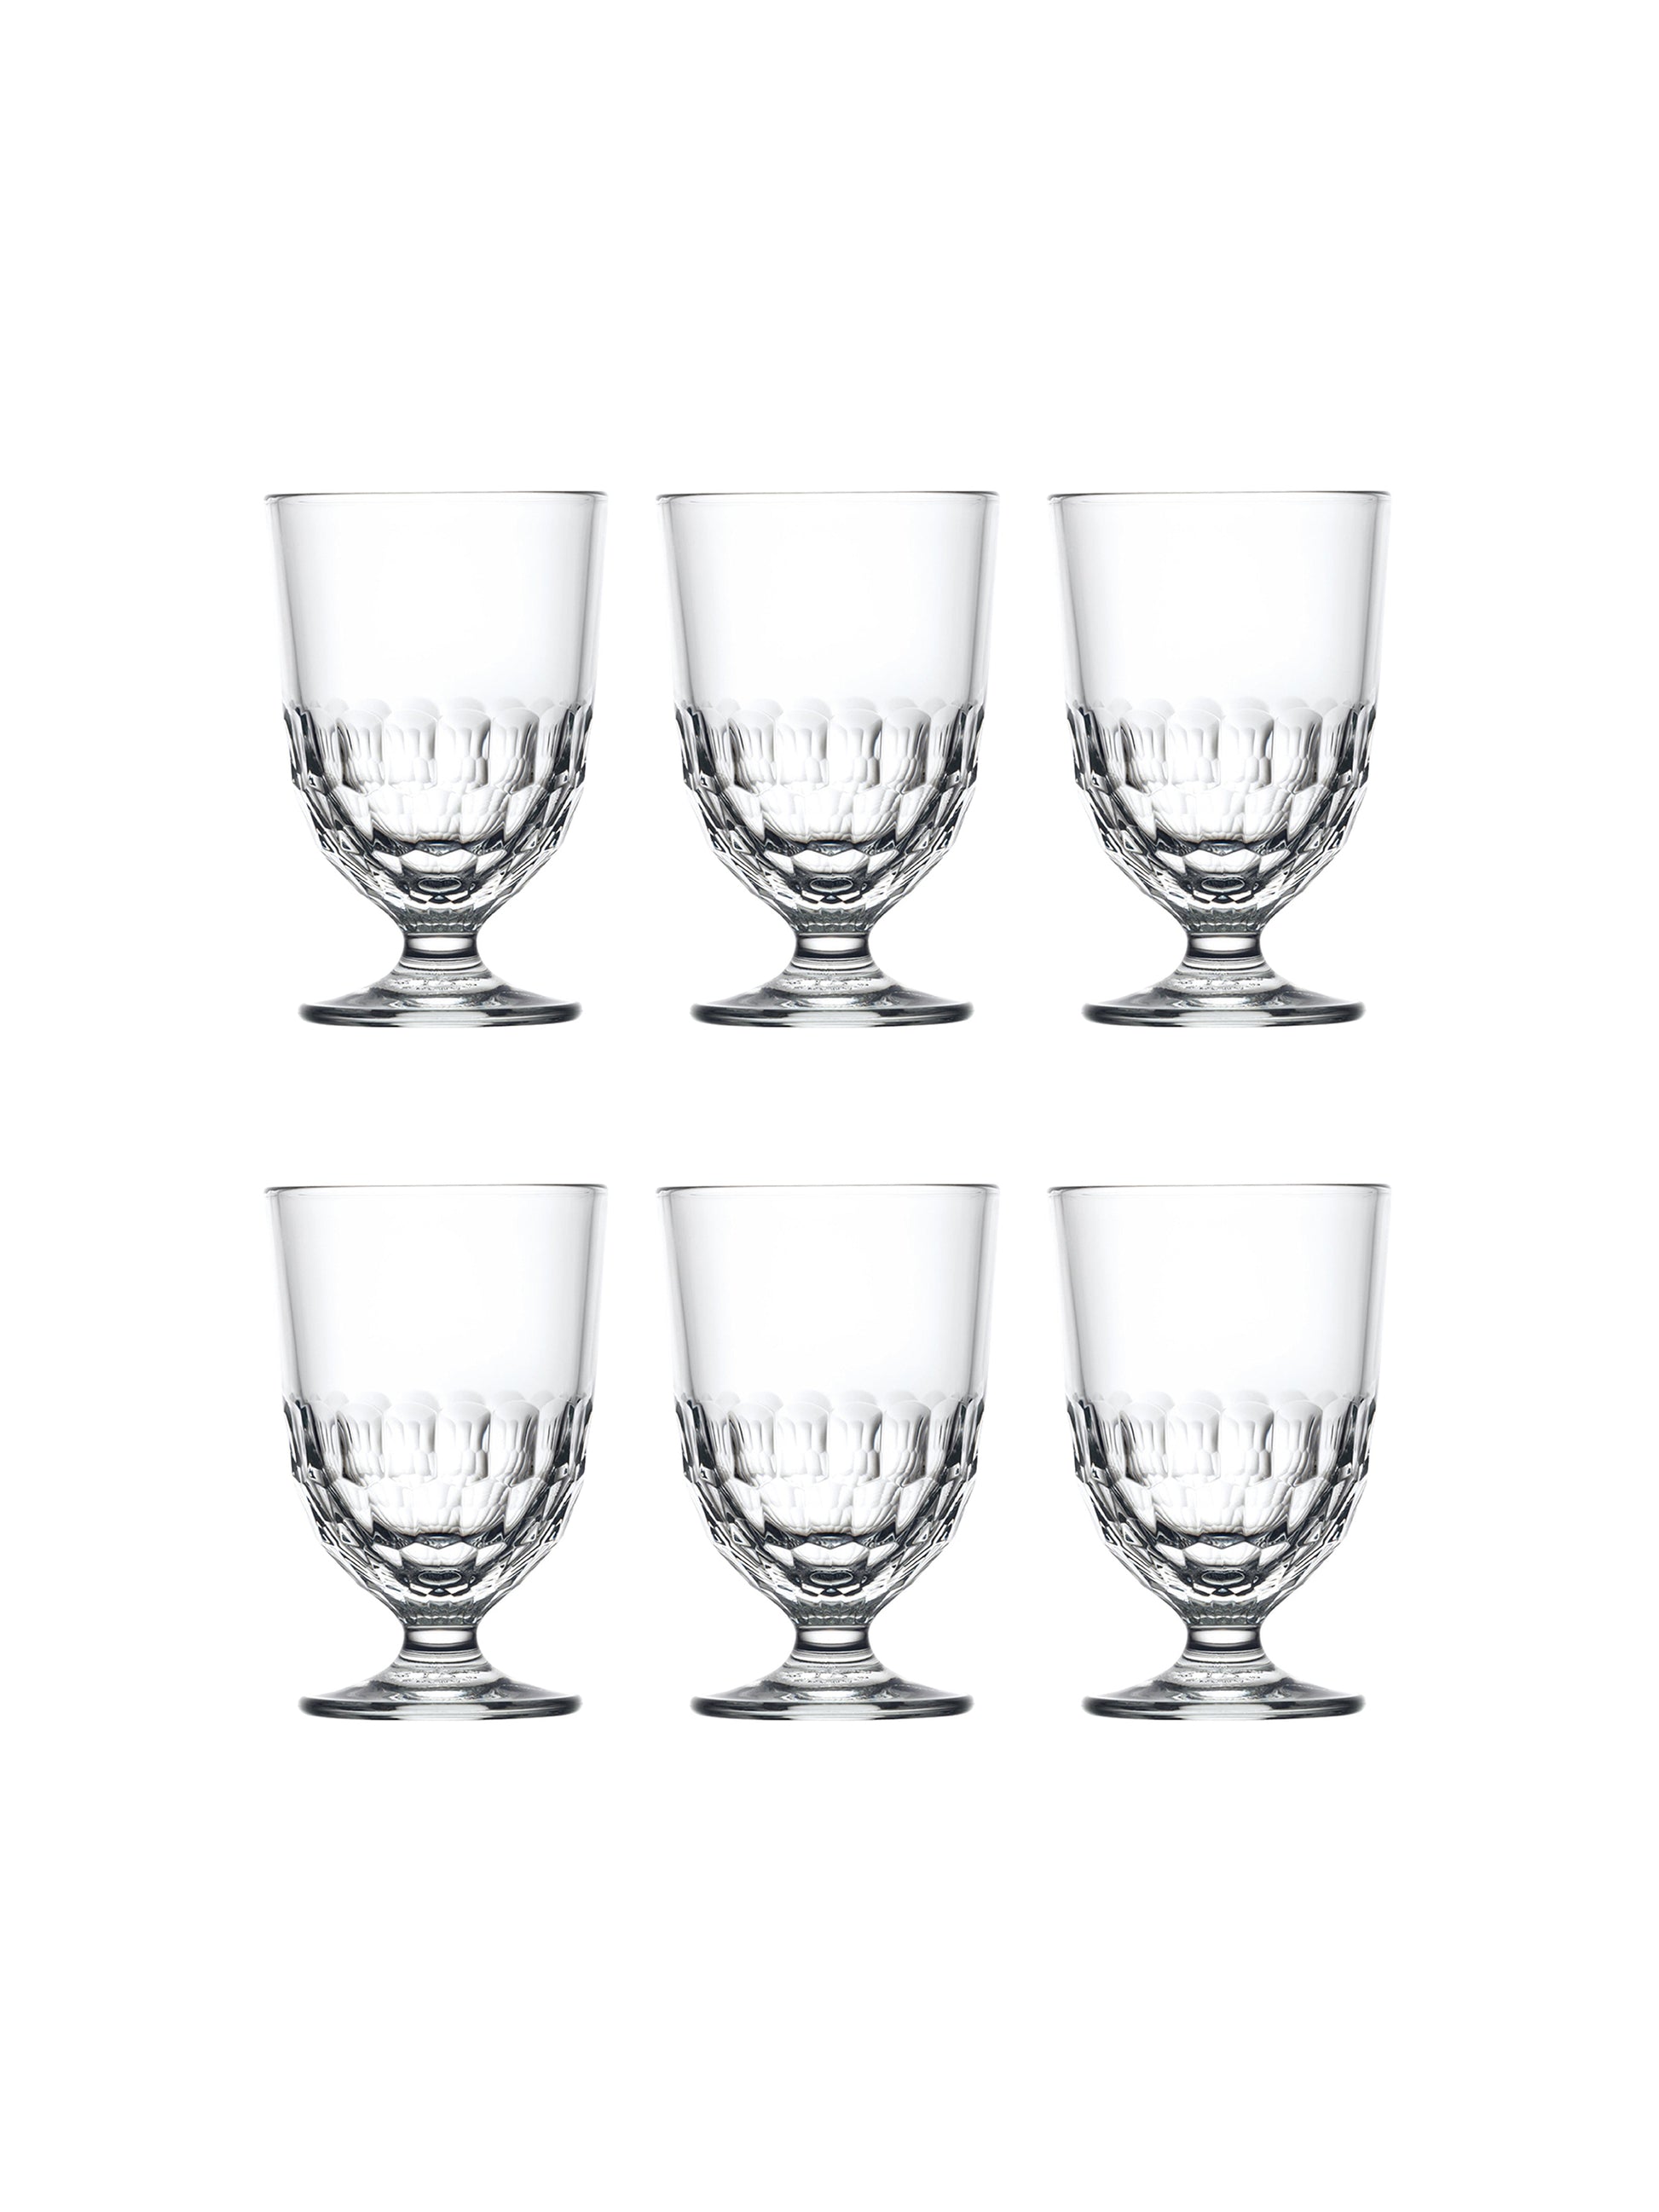 How to set the table and order the glasses?